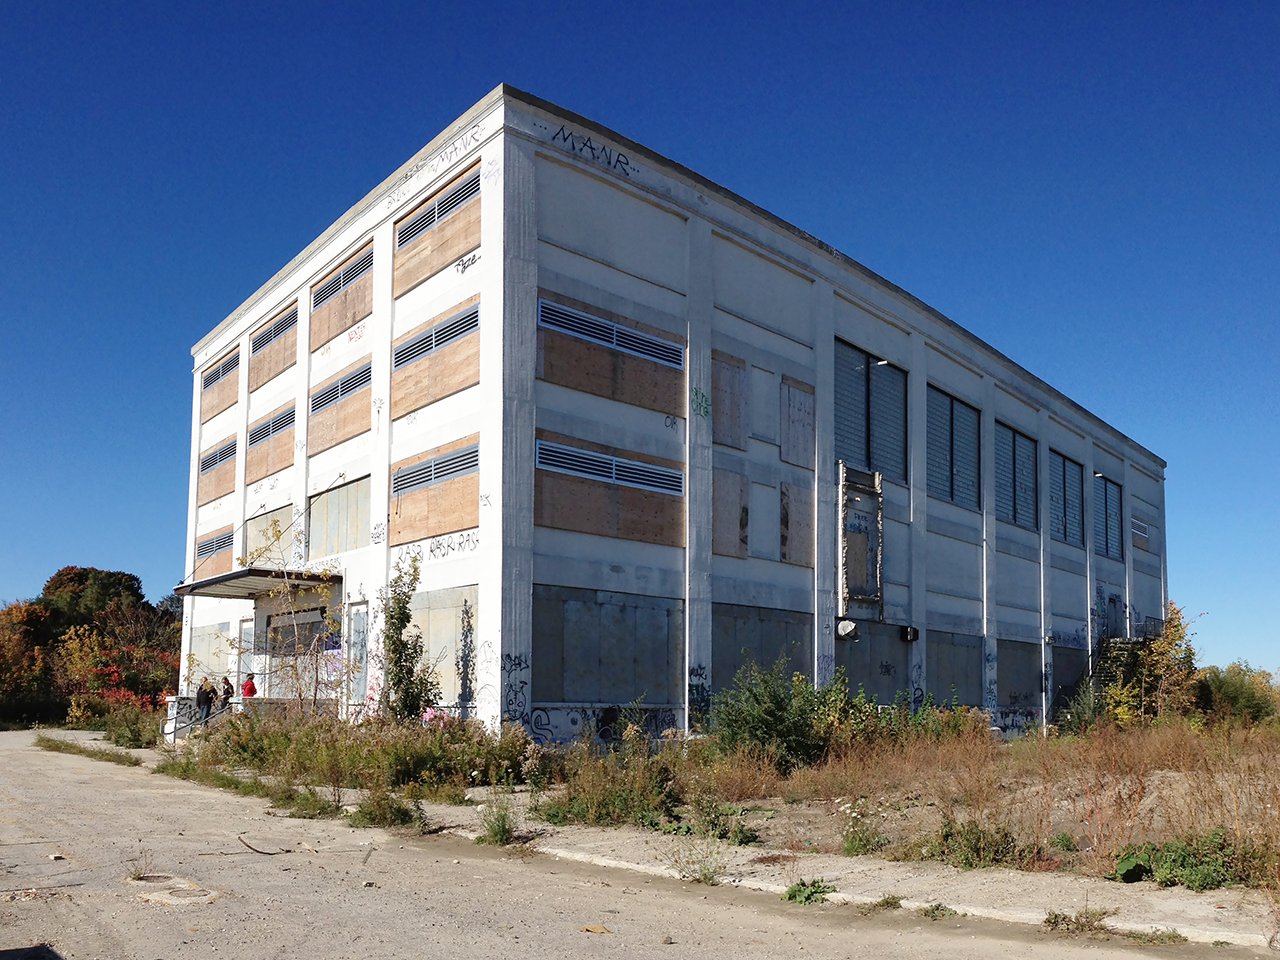 1280x960px-Employees’-Building-(Building-9),-Kodak-Heights-in-2014.-Remains-vWA24